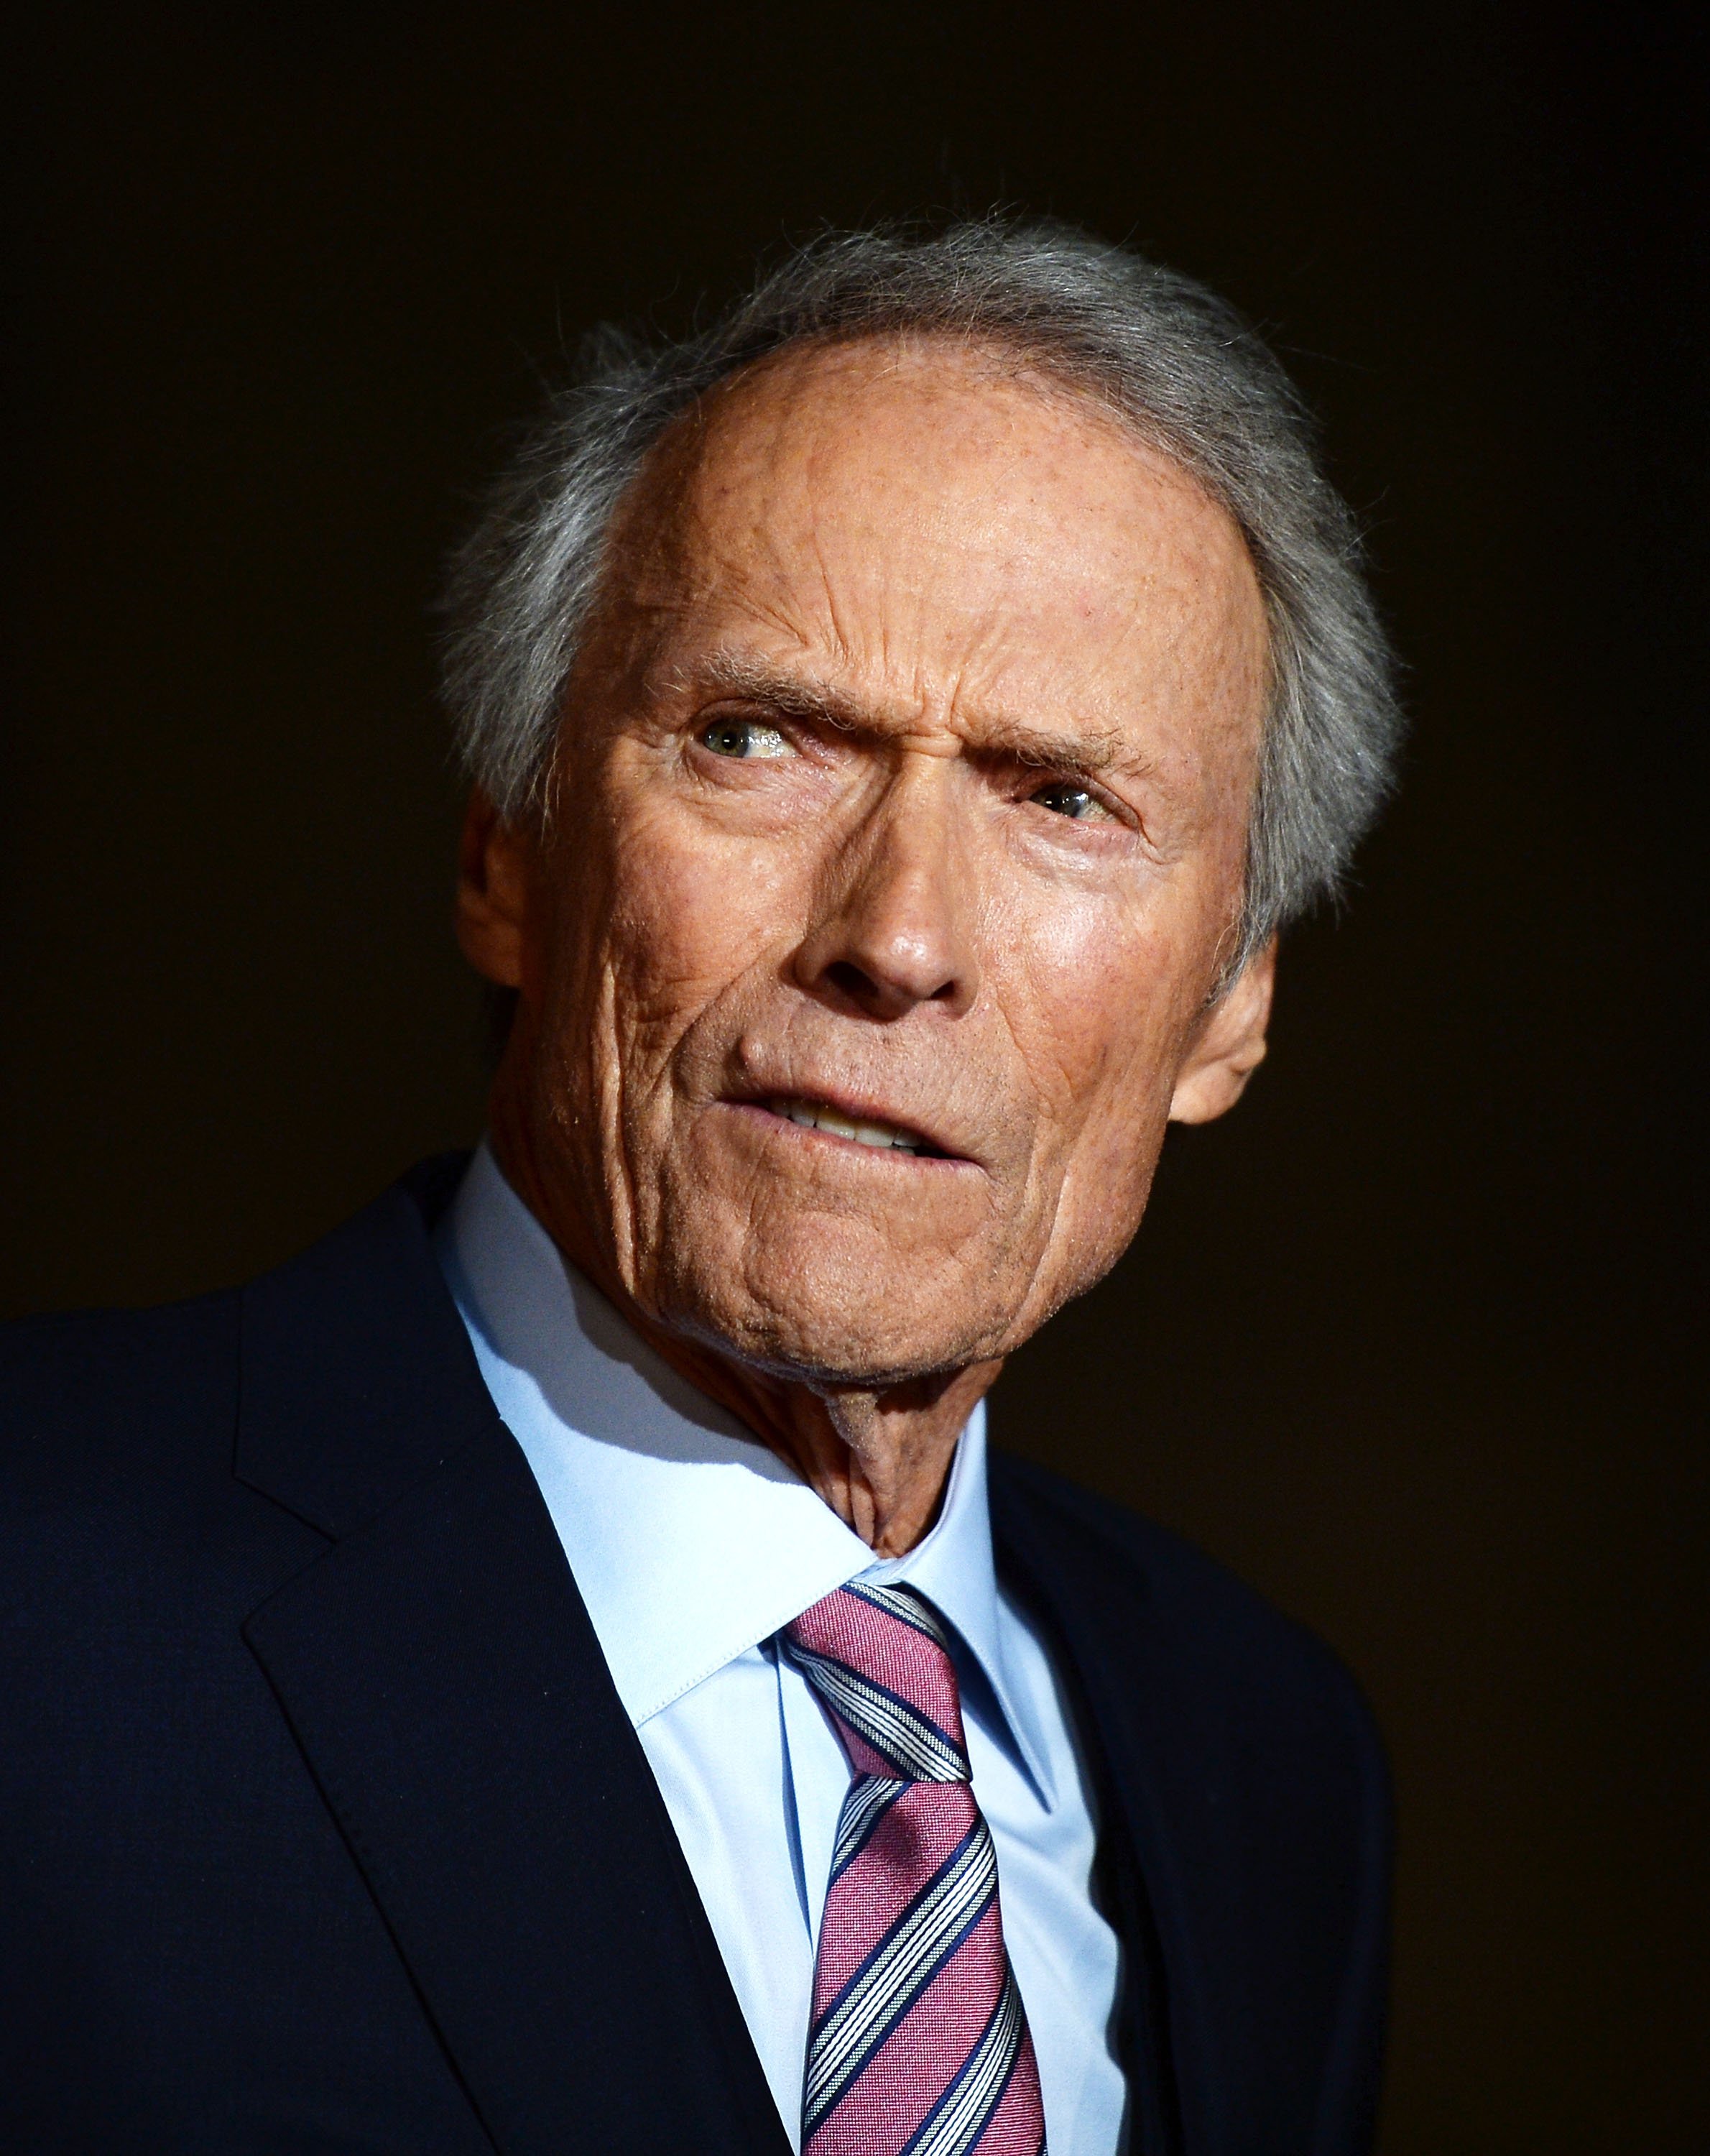 Clint Eastwood arrives at the premiere of Warner Bros. Pictures' "The 15:17 to Paris" at Warner Bros. Studios on February 5, 2018 in Burbank, California. | Source: Getty Images